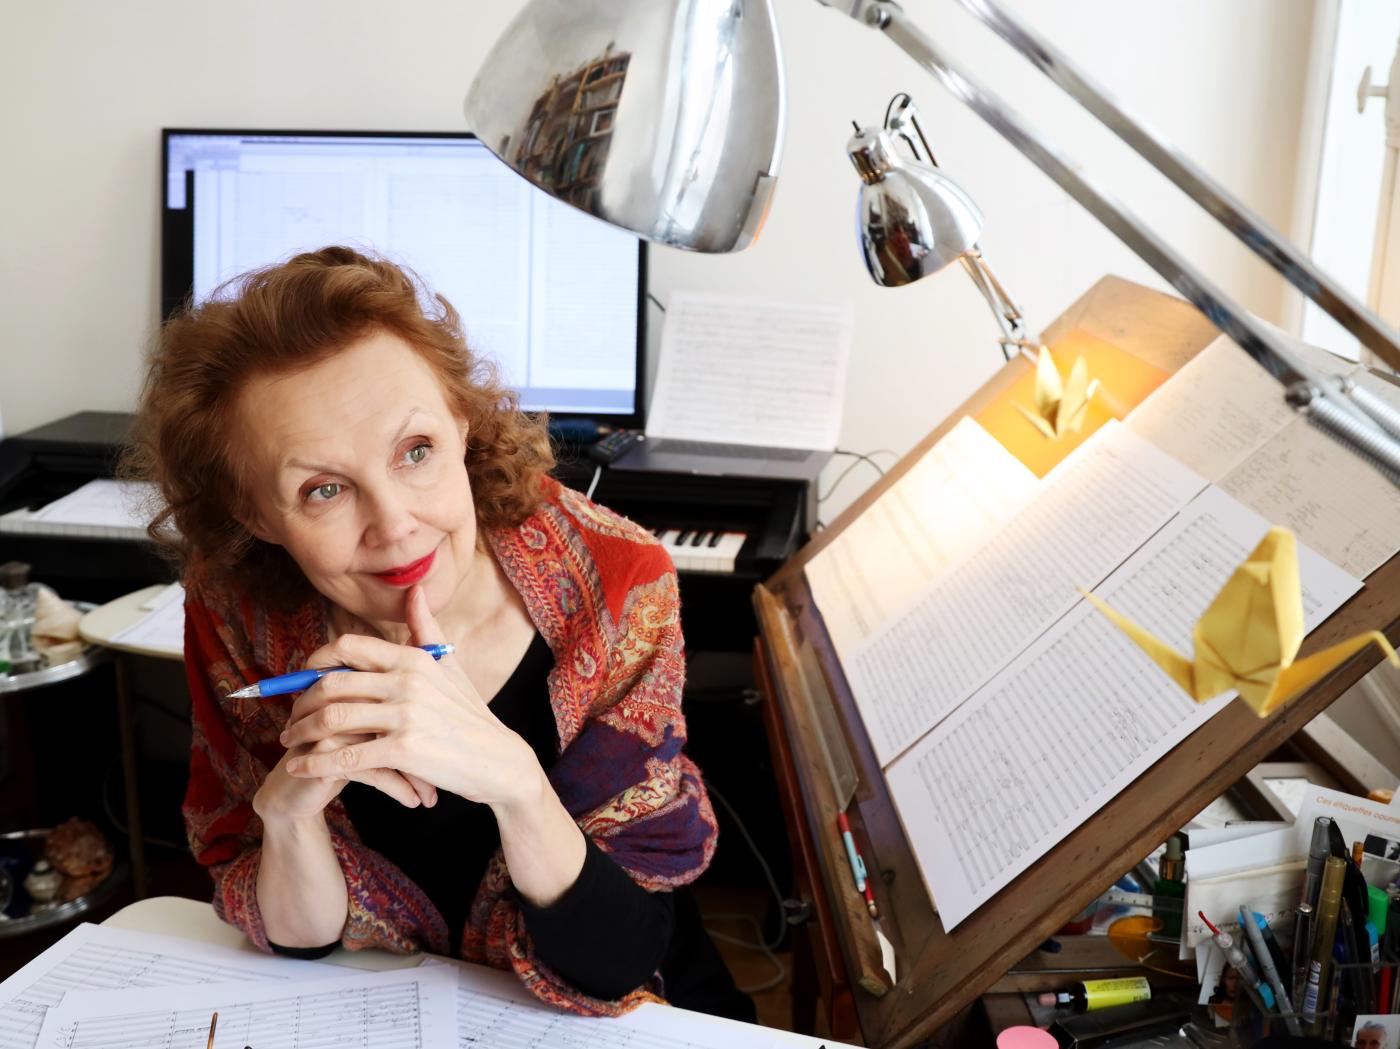 At the beginning of her career, Kaija Saariaho had plenty of doubts. She ended up becoming one of the most revered composers of her generation.